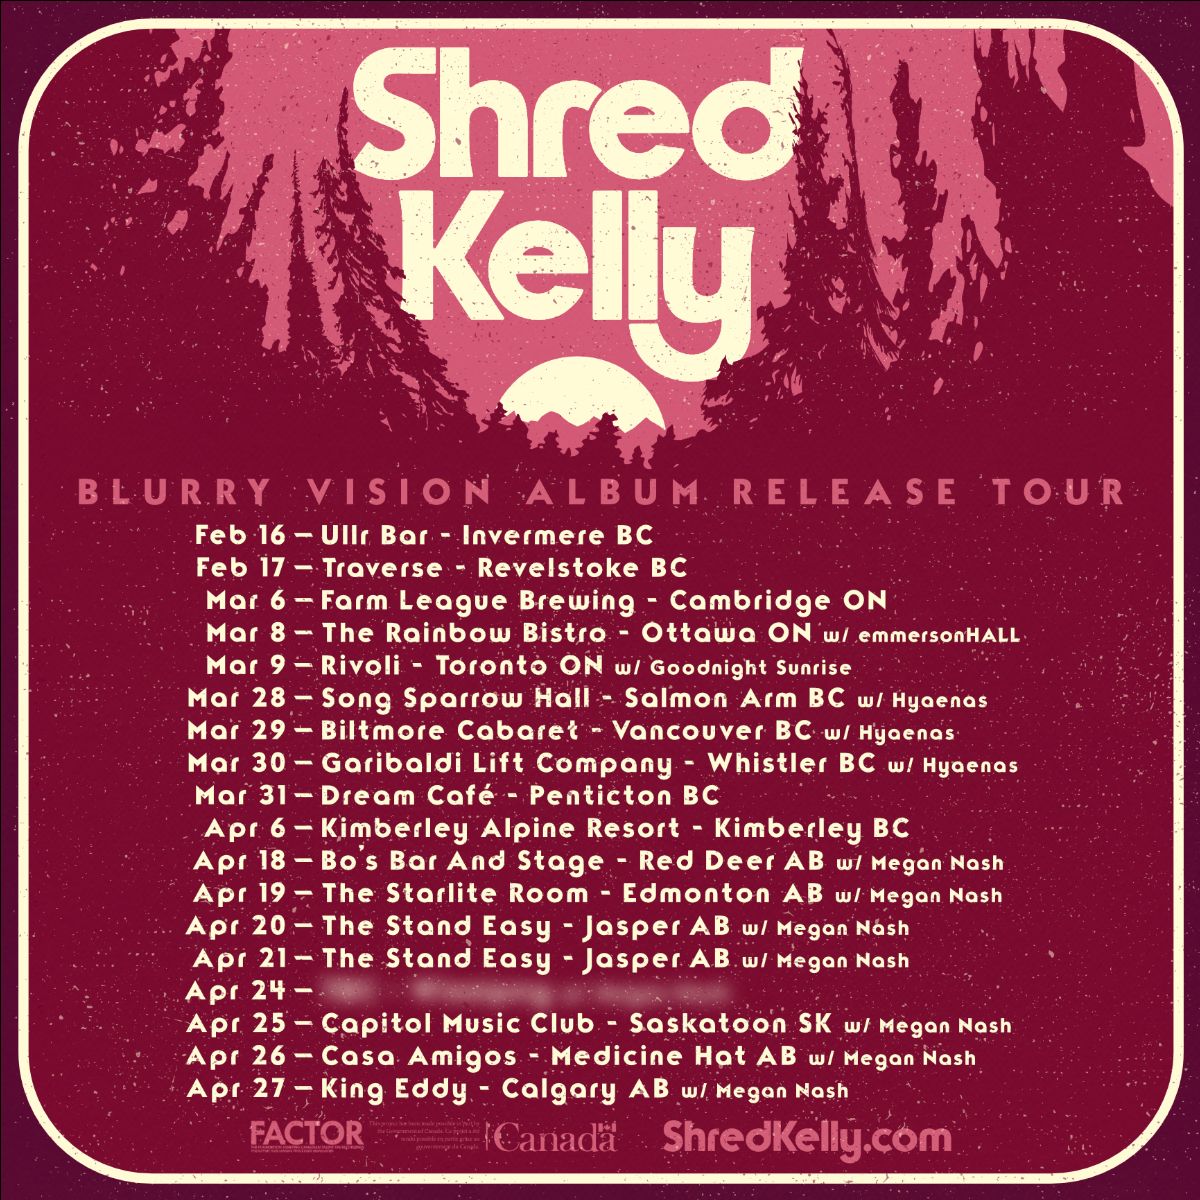 Shred Kelly “Blurry Vision Album Release Tour” flyer